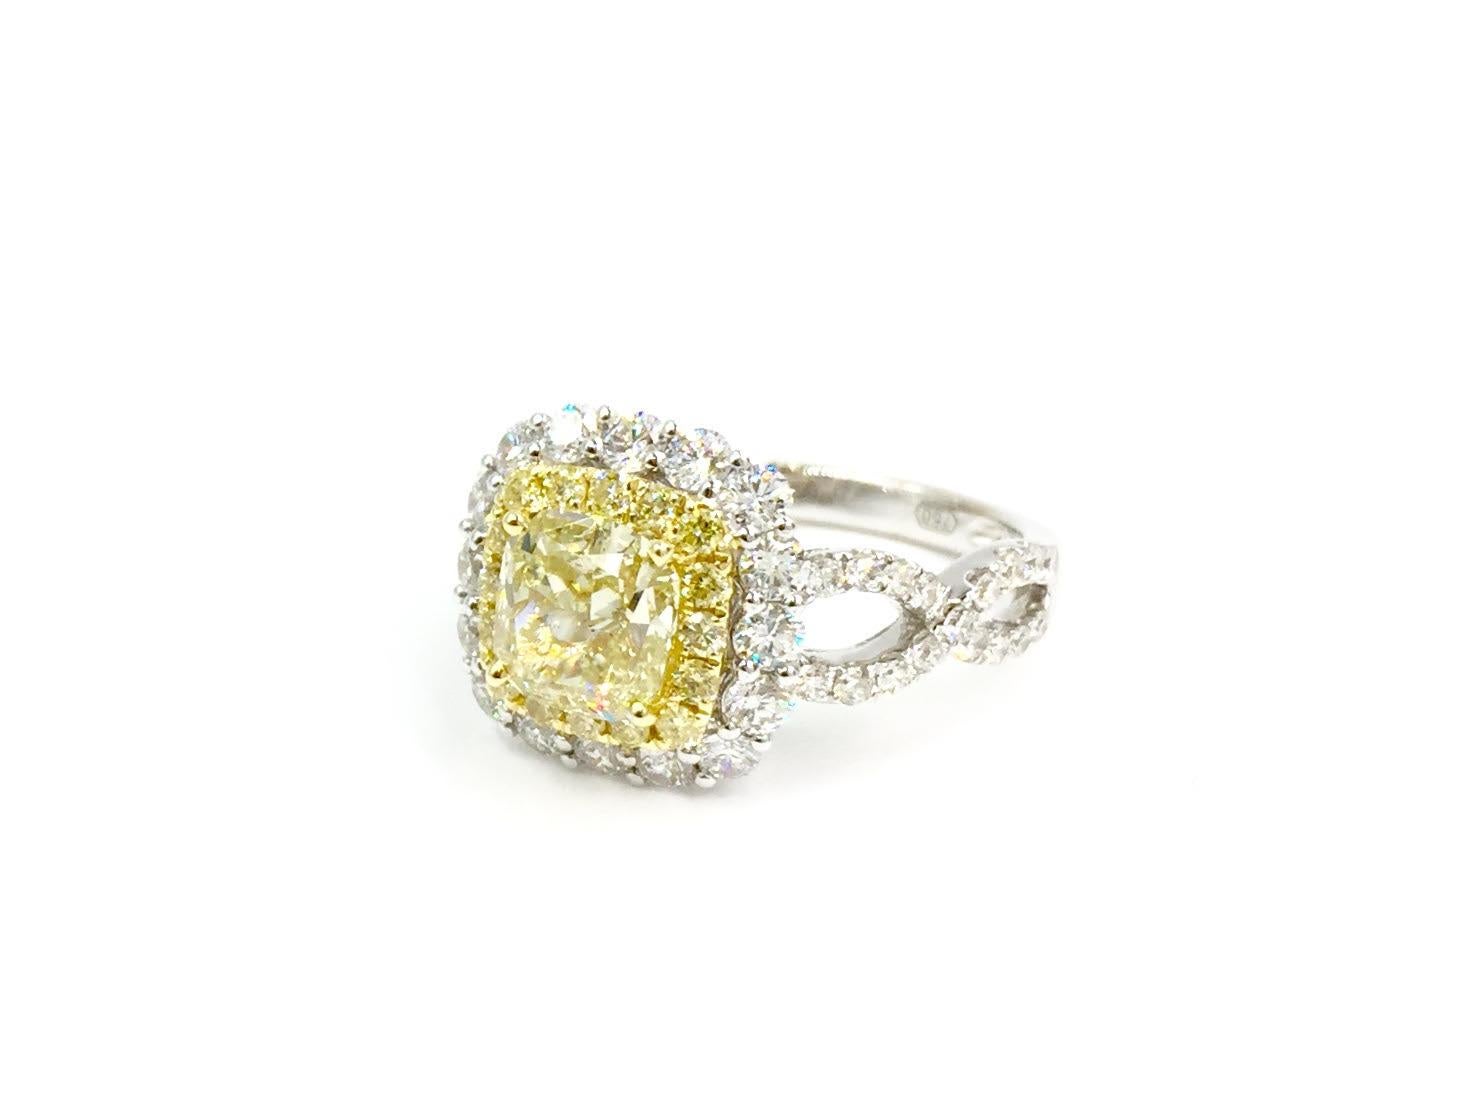 This gorgeous ring by Luca Gems, a high-end jewelry designer specializing in colored diamonds, features a GIA certified 1.55 carat cushion shape natural fancy yellow diamond of SI2 clarity. It is expertly set in an 18 karat gold diamond halo setting